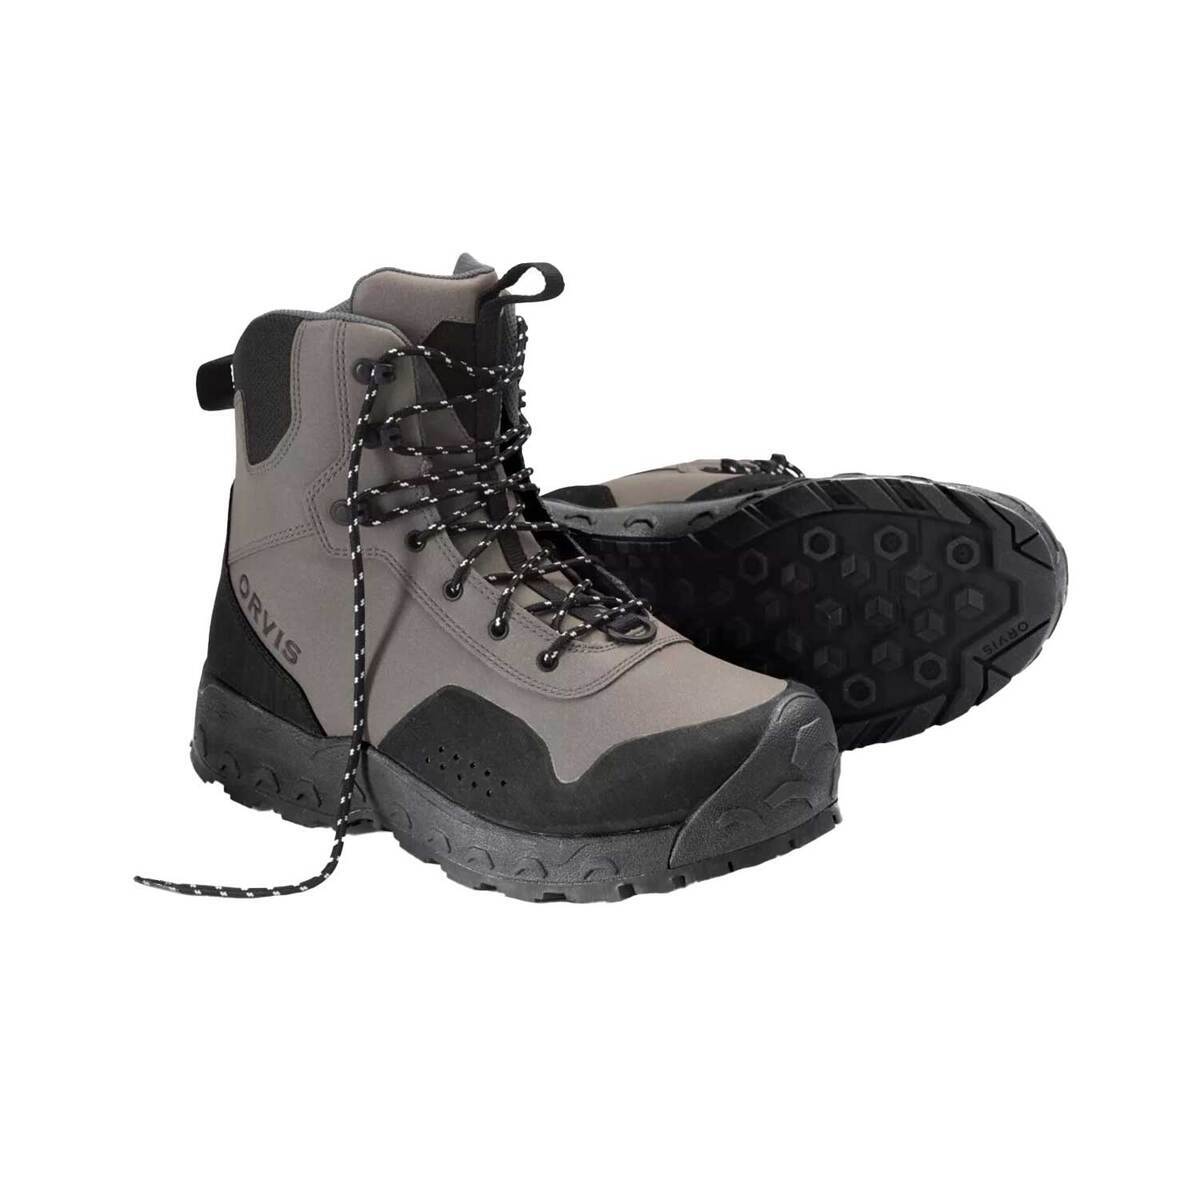 Orvis Men's Clearwater Wading Boots - Rubber Sole 8 / Gravel